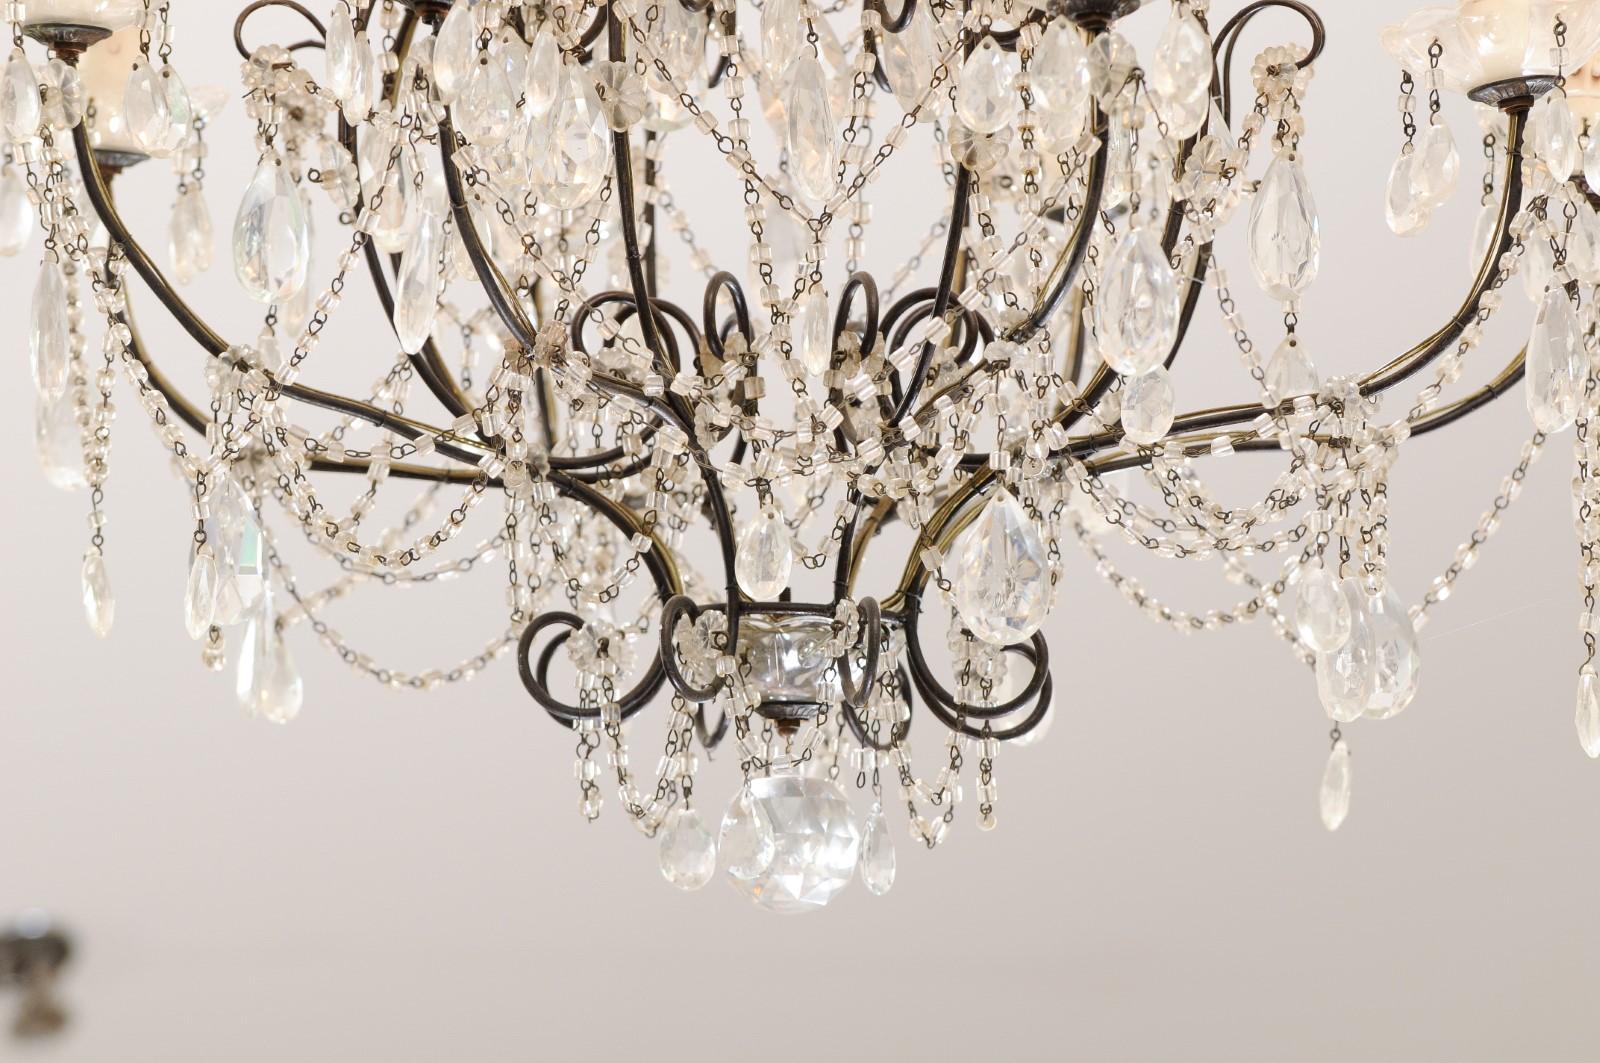 Italian 19th Century 10-Light Crystal and Iron Chandelier with Scrolling Arms For Sale 3